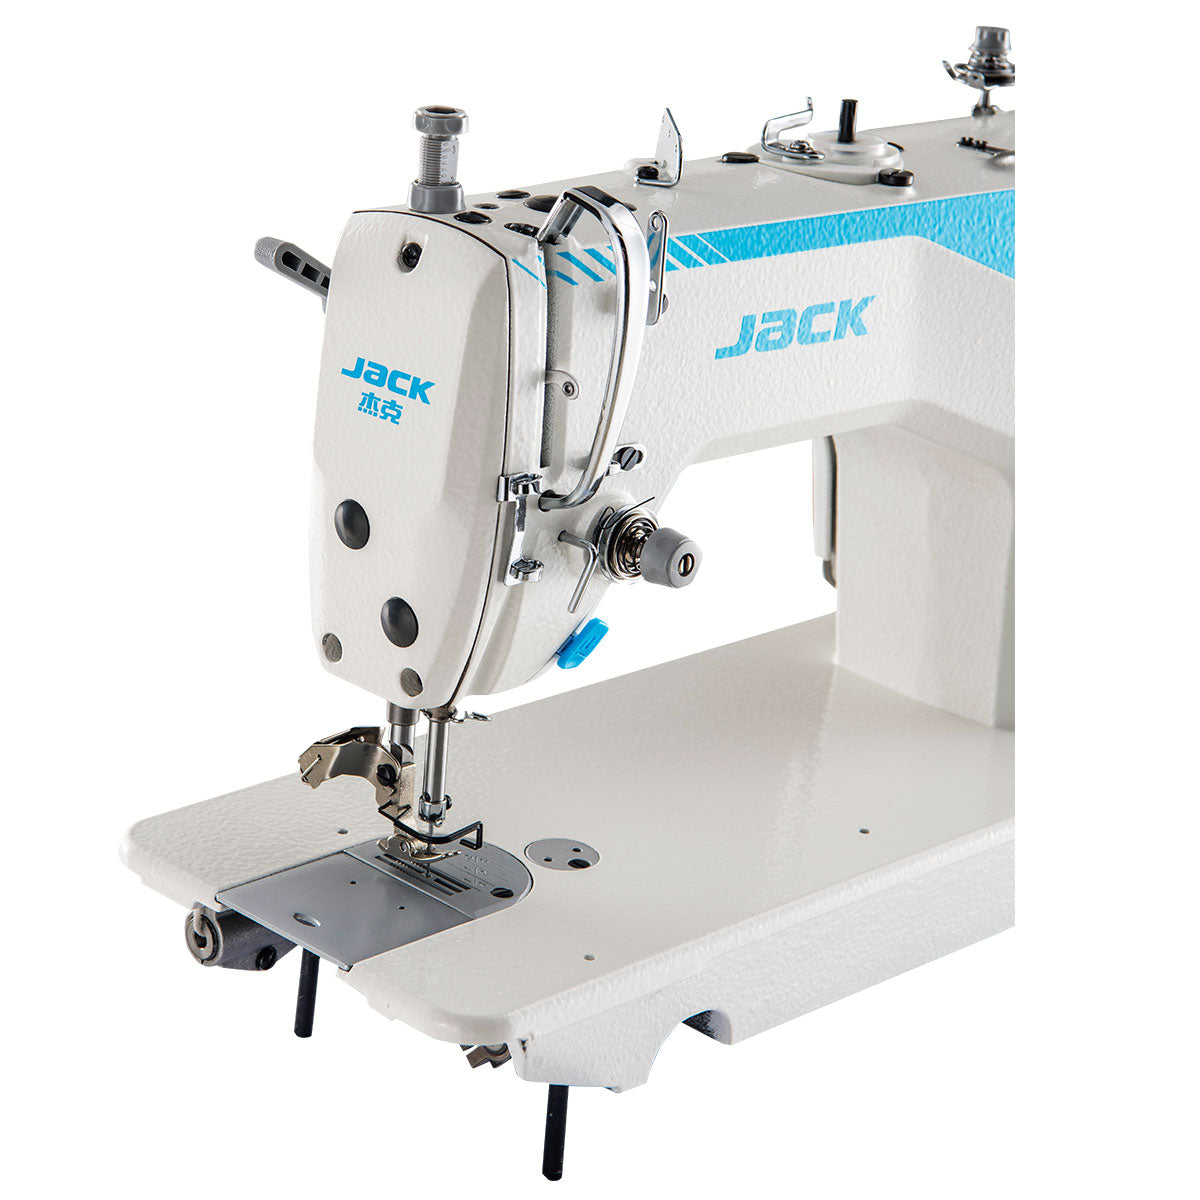 JACK F5 Single Needle Direct Drive Lockstitch Industrial Sewing Machine Assembled with Table and Stand Included